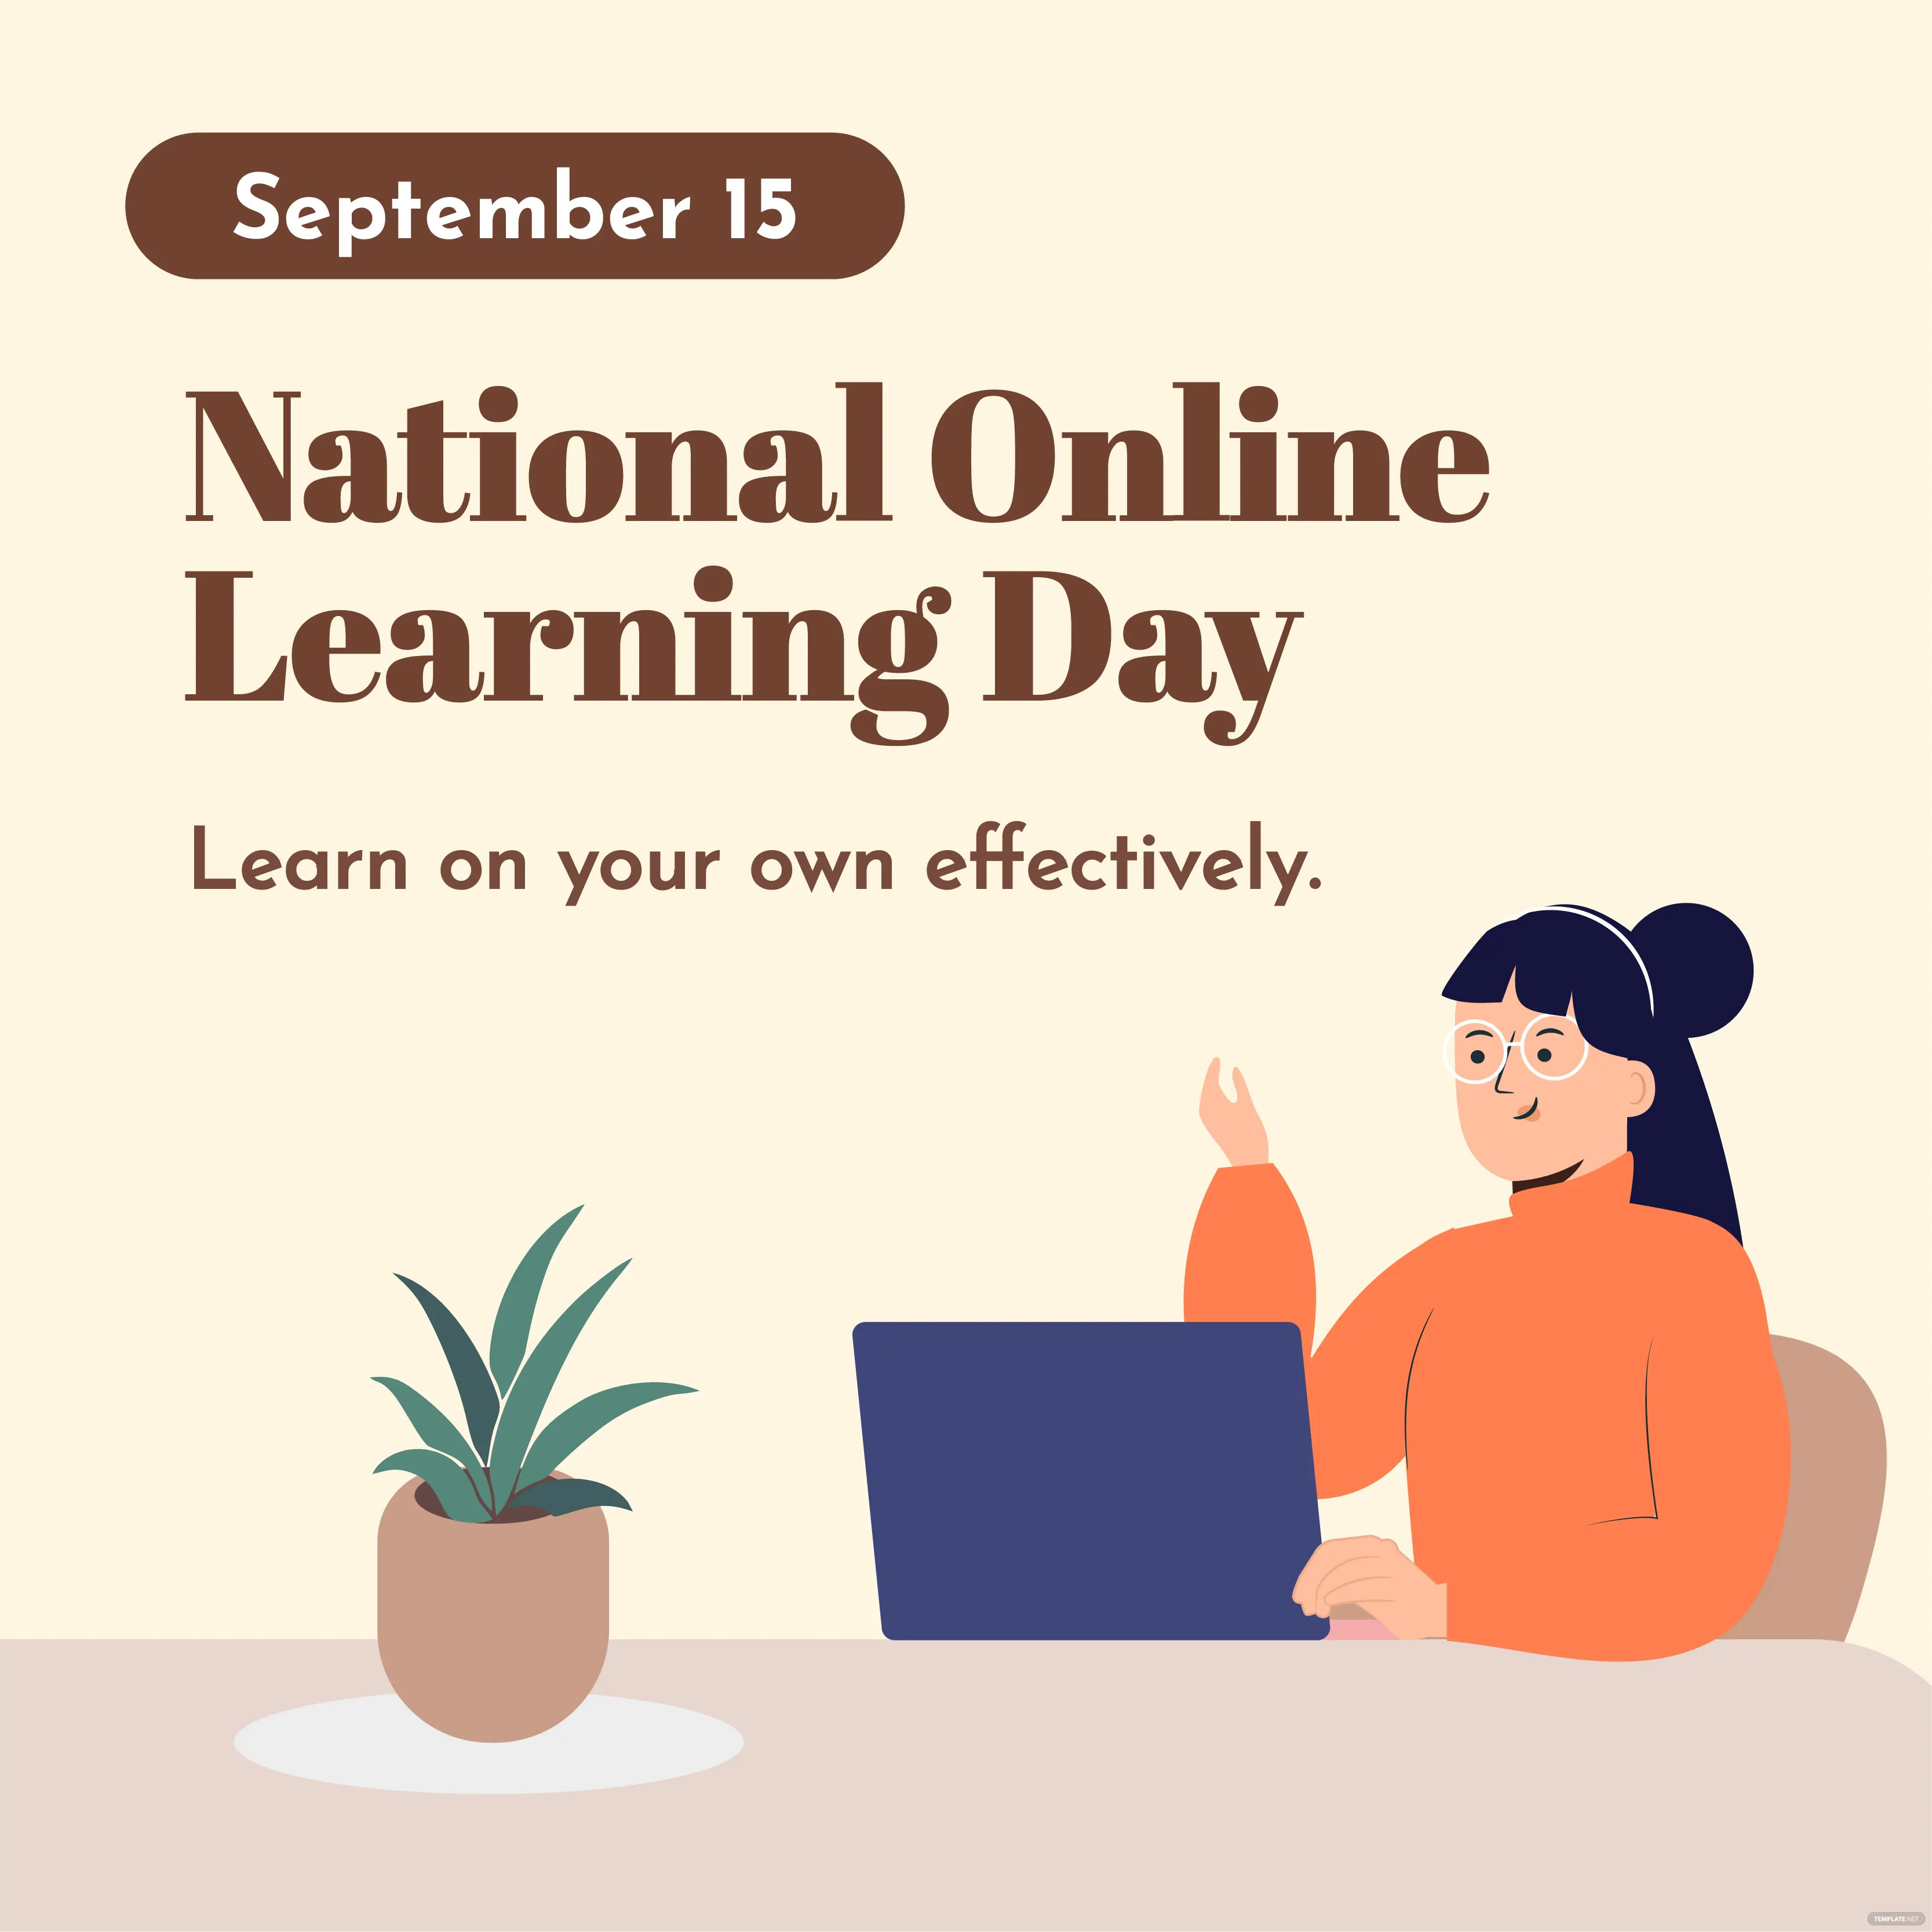 National Online Learning Day When is National Online Learning Day